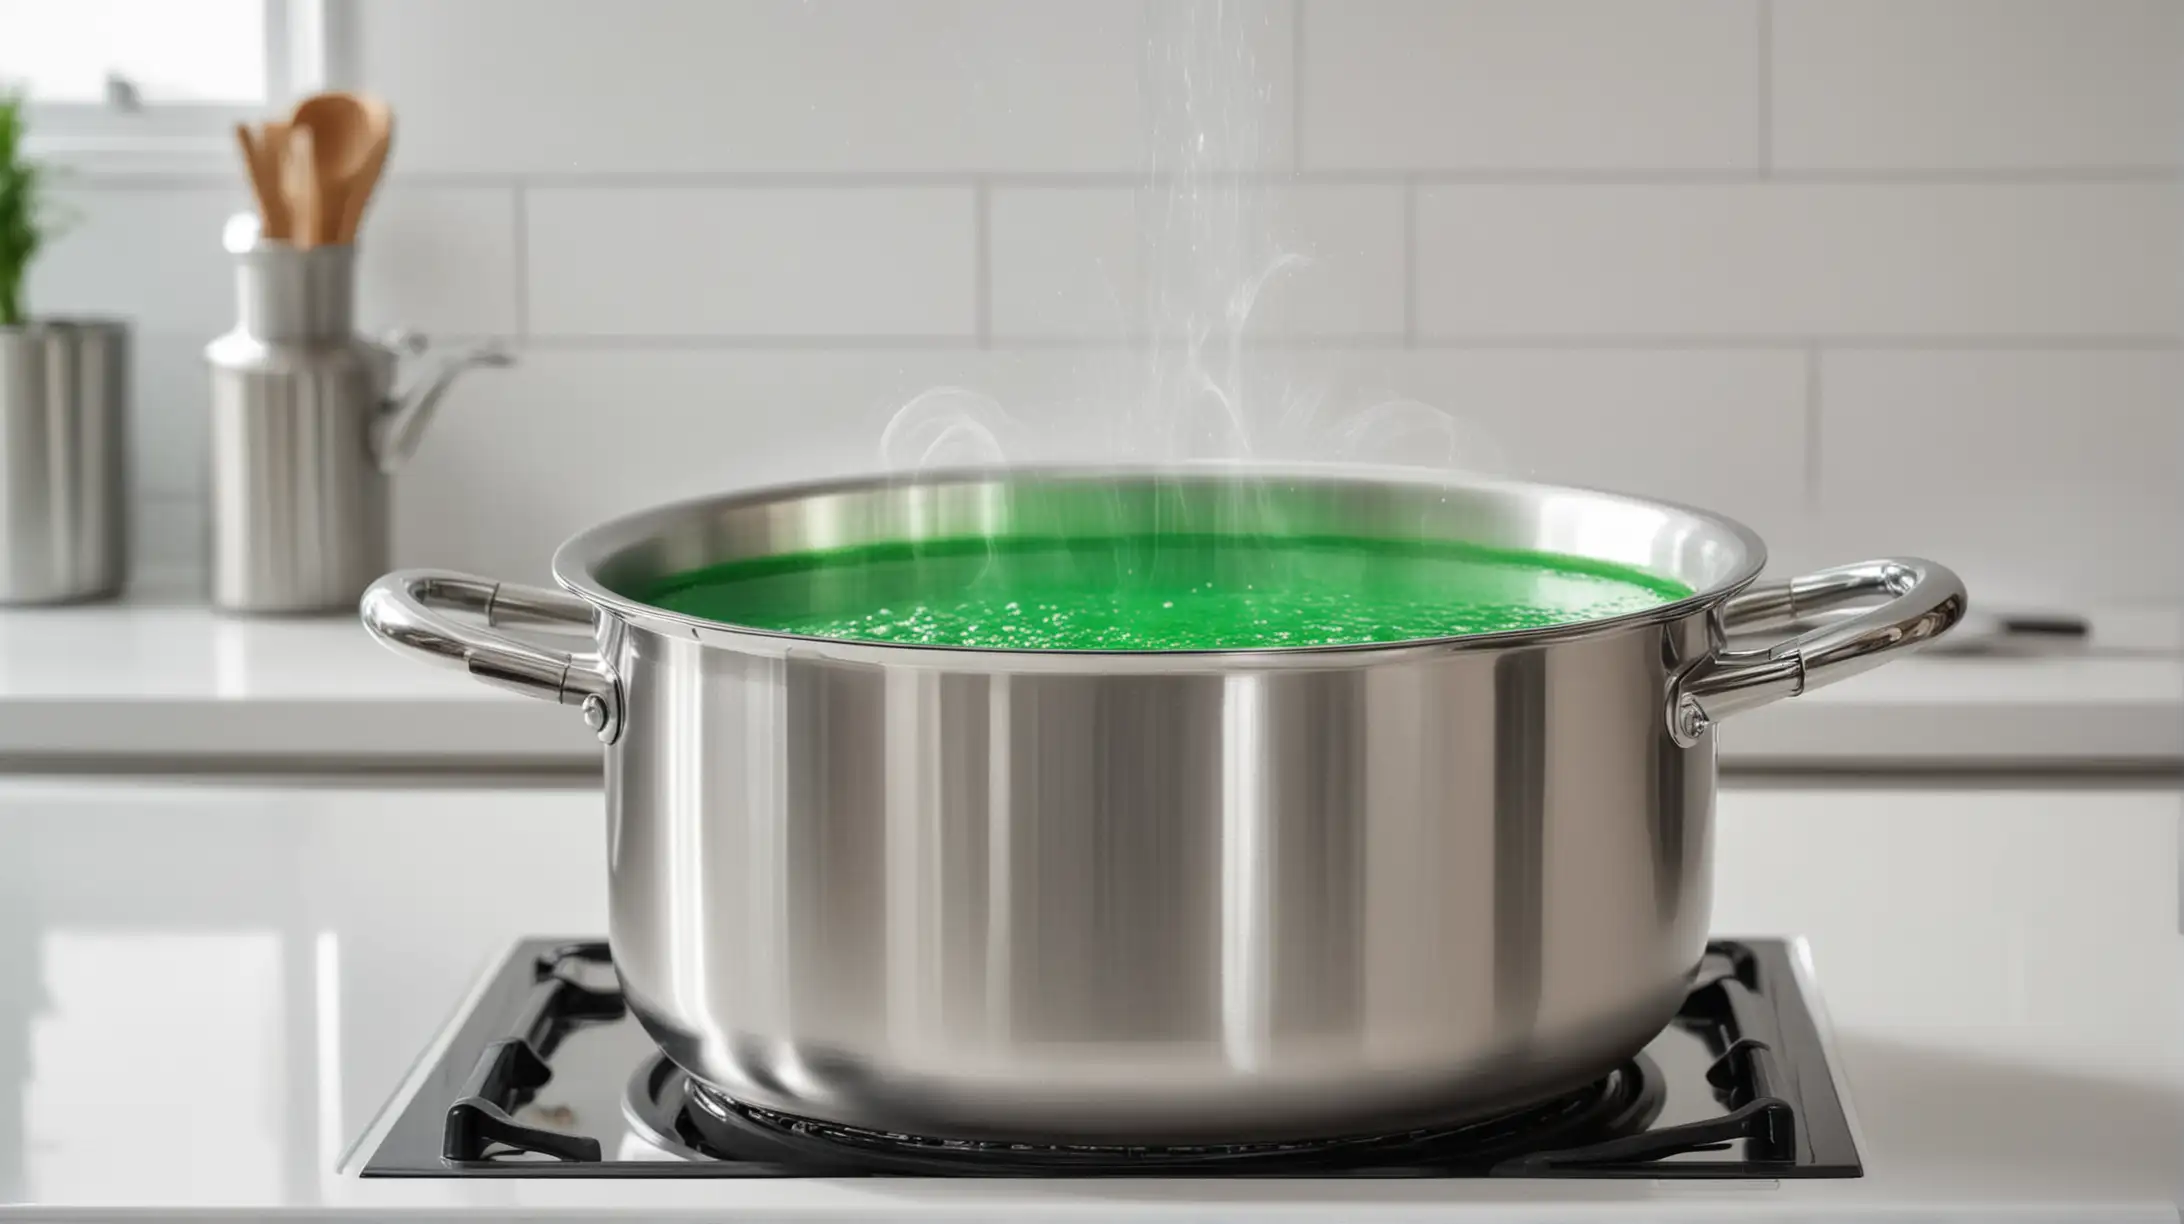 Shimmering Green Potion in a Boiling Pot on a Pristine White Kitchen Counter